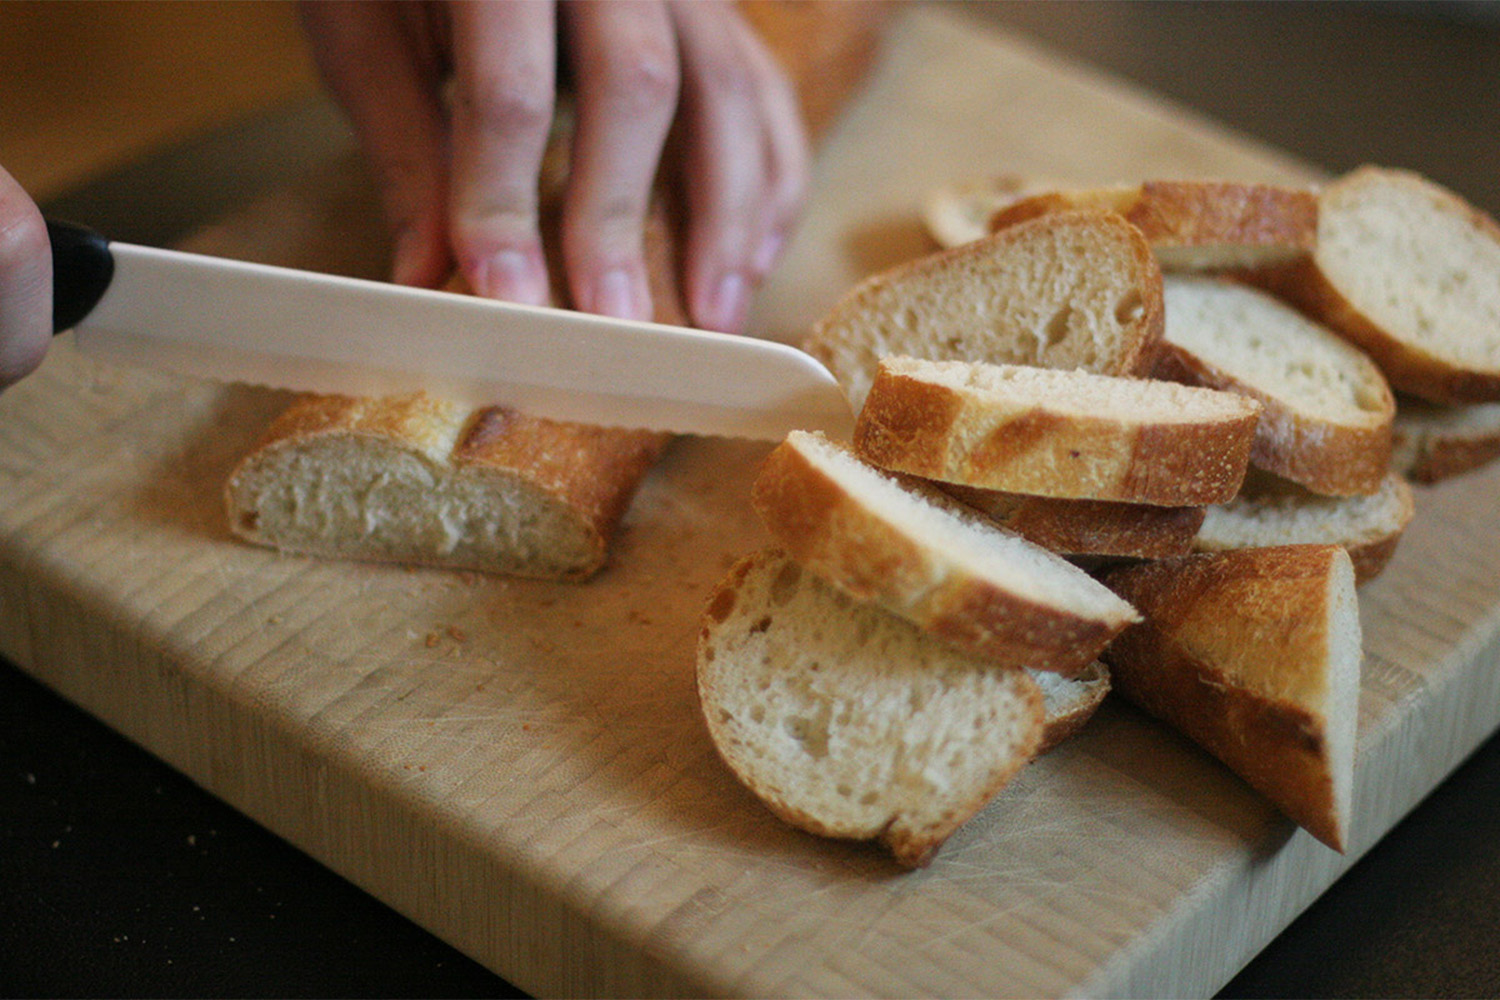 Slicing the baguette for the delicious pesto dip.